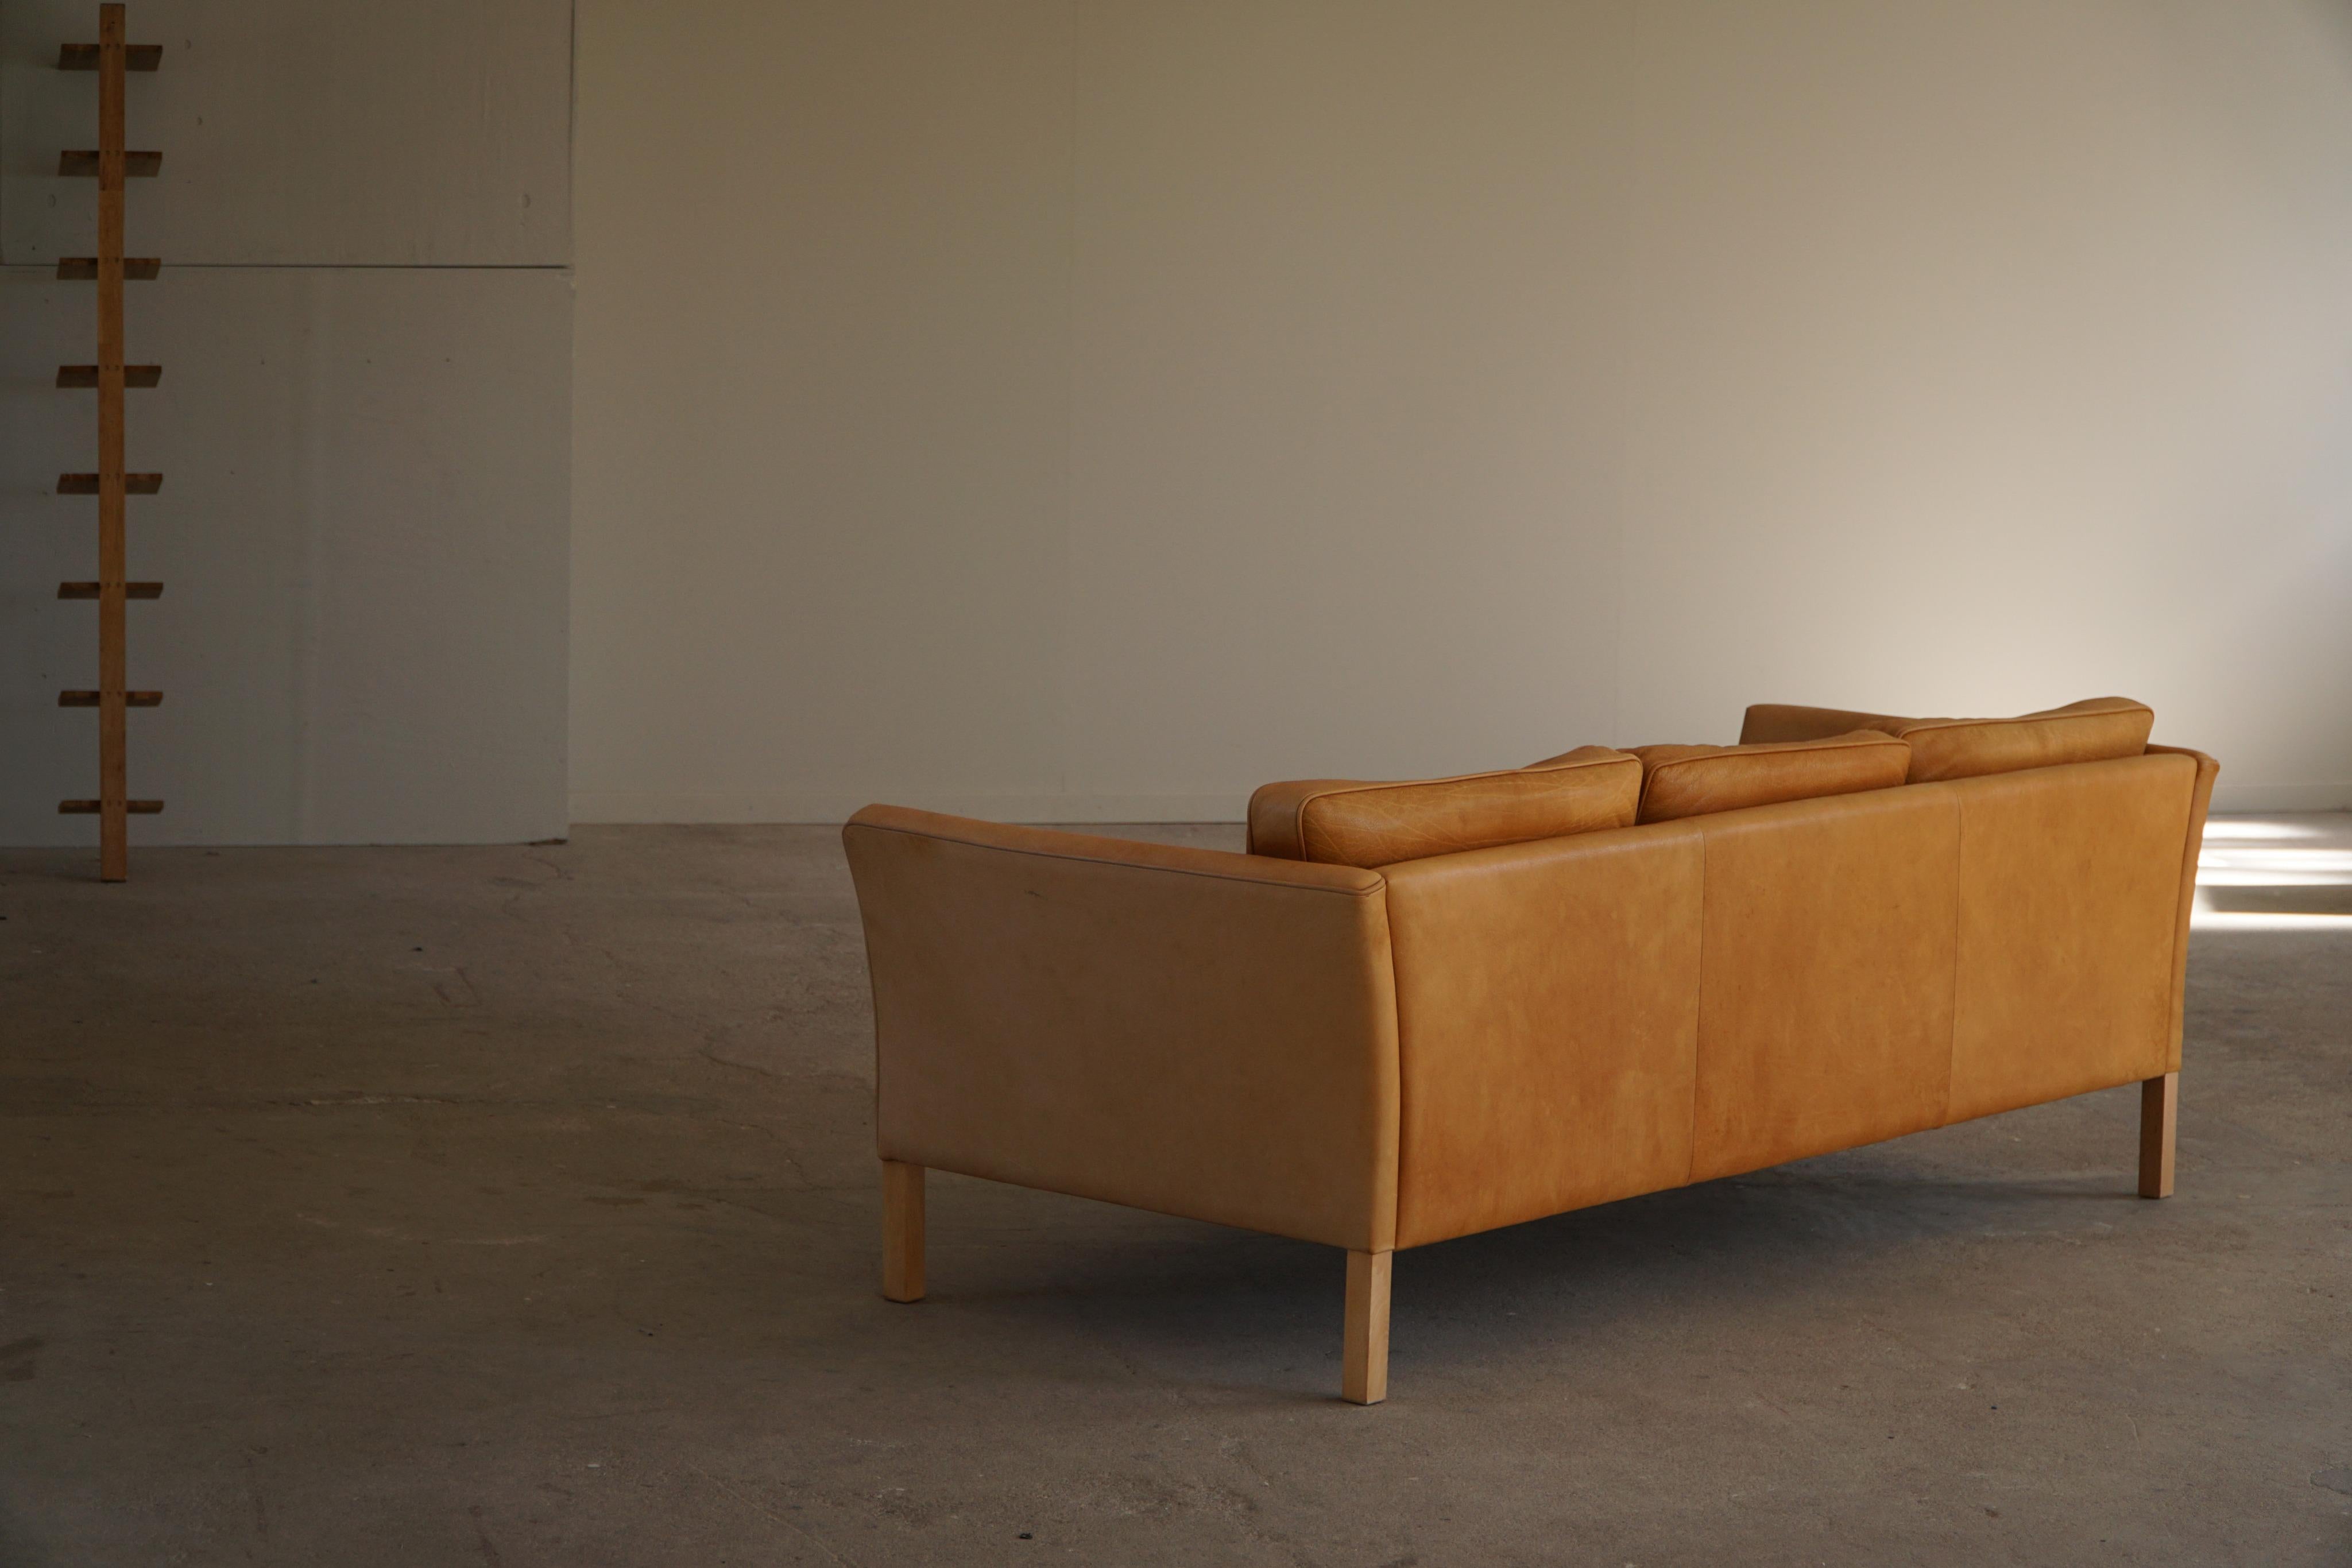 Danish Midcentury Stouby 3-Seater Sofa in Cognac Brown Leather, Made in 1970s For Sale 2